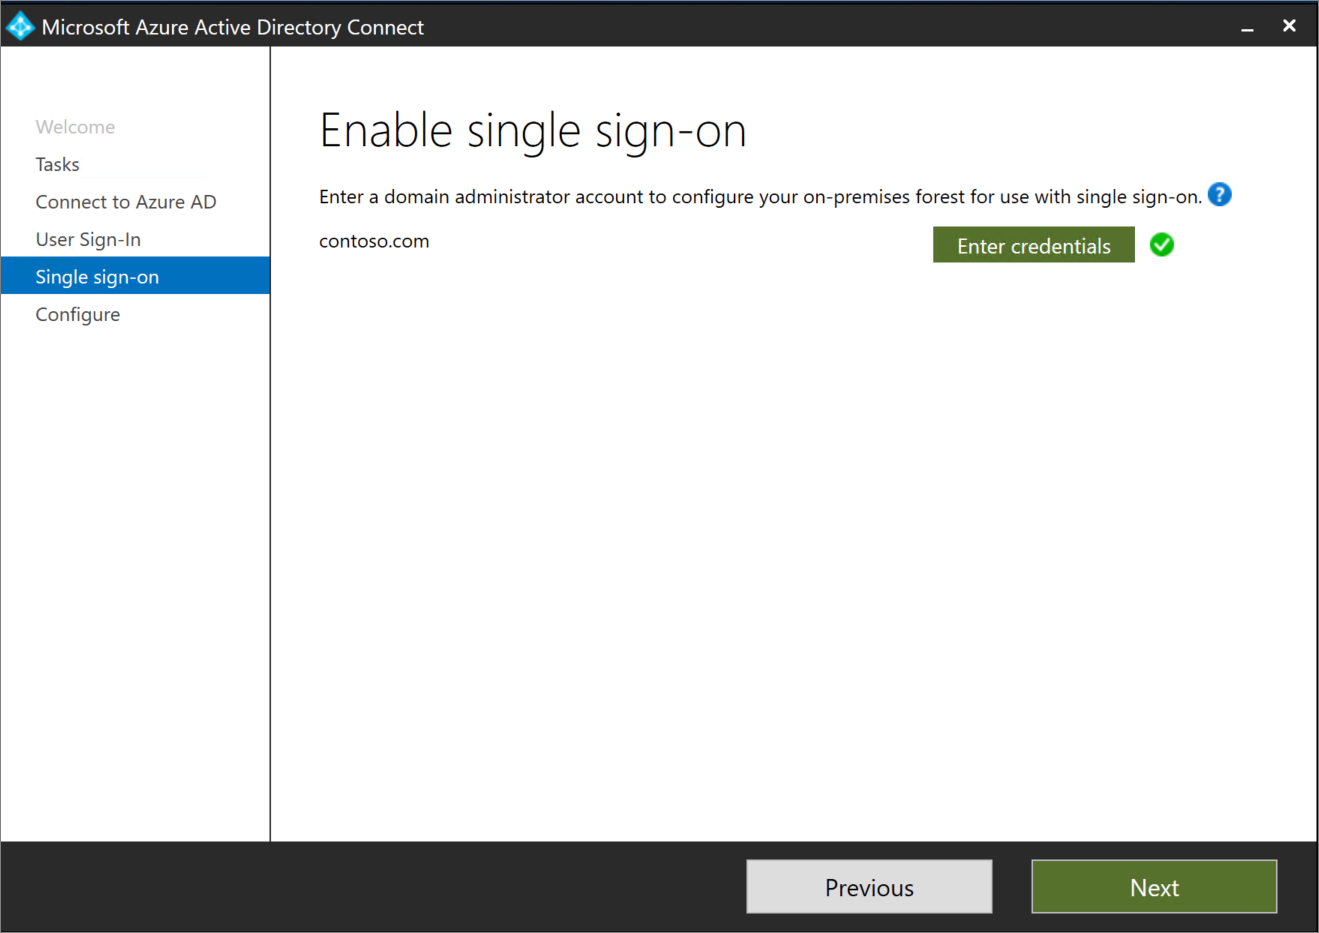 Enable single sign-on page